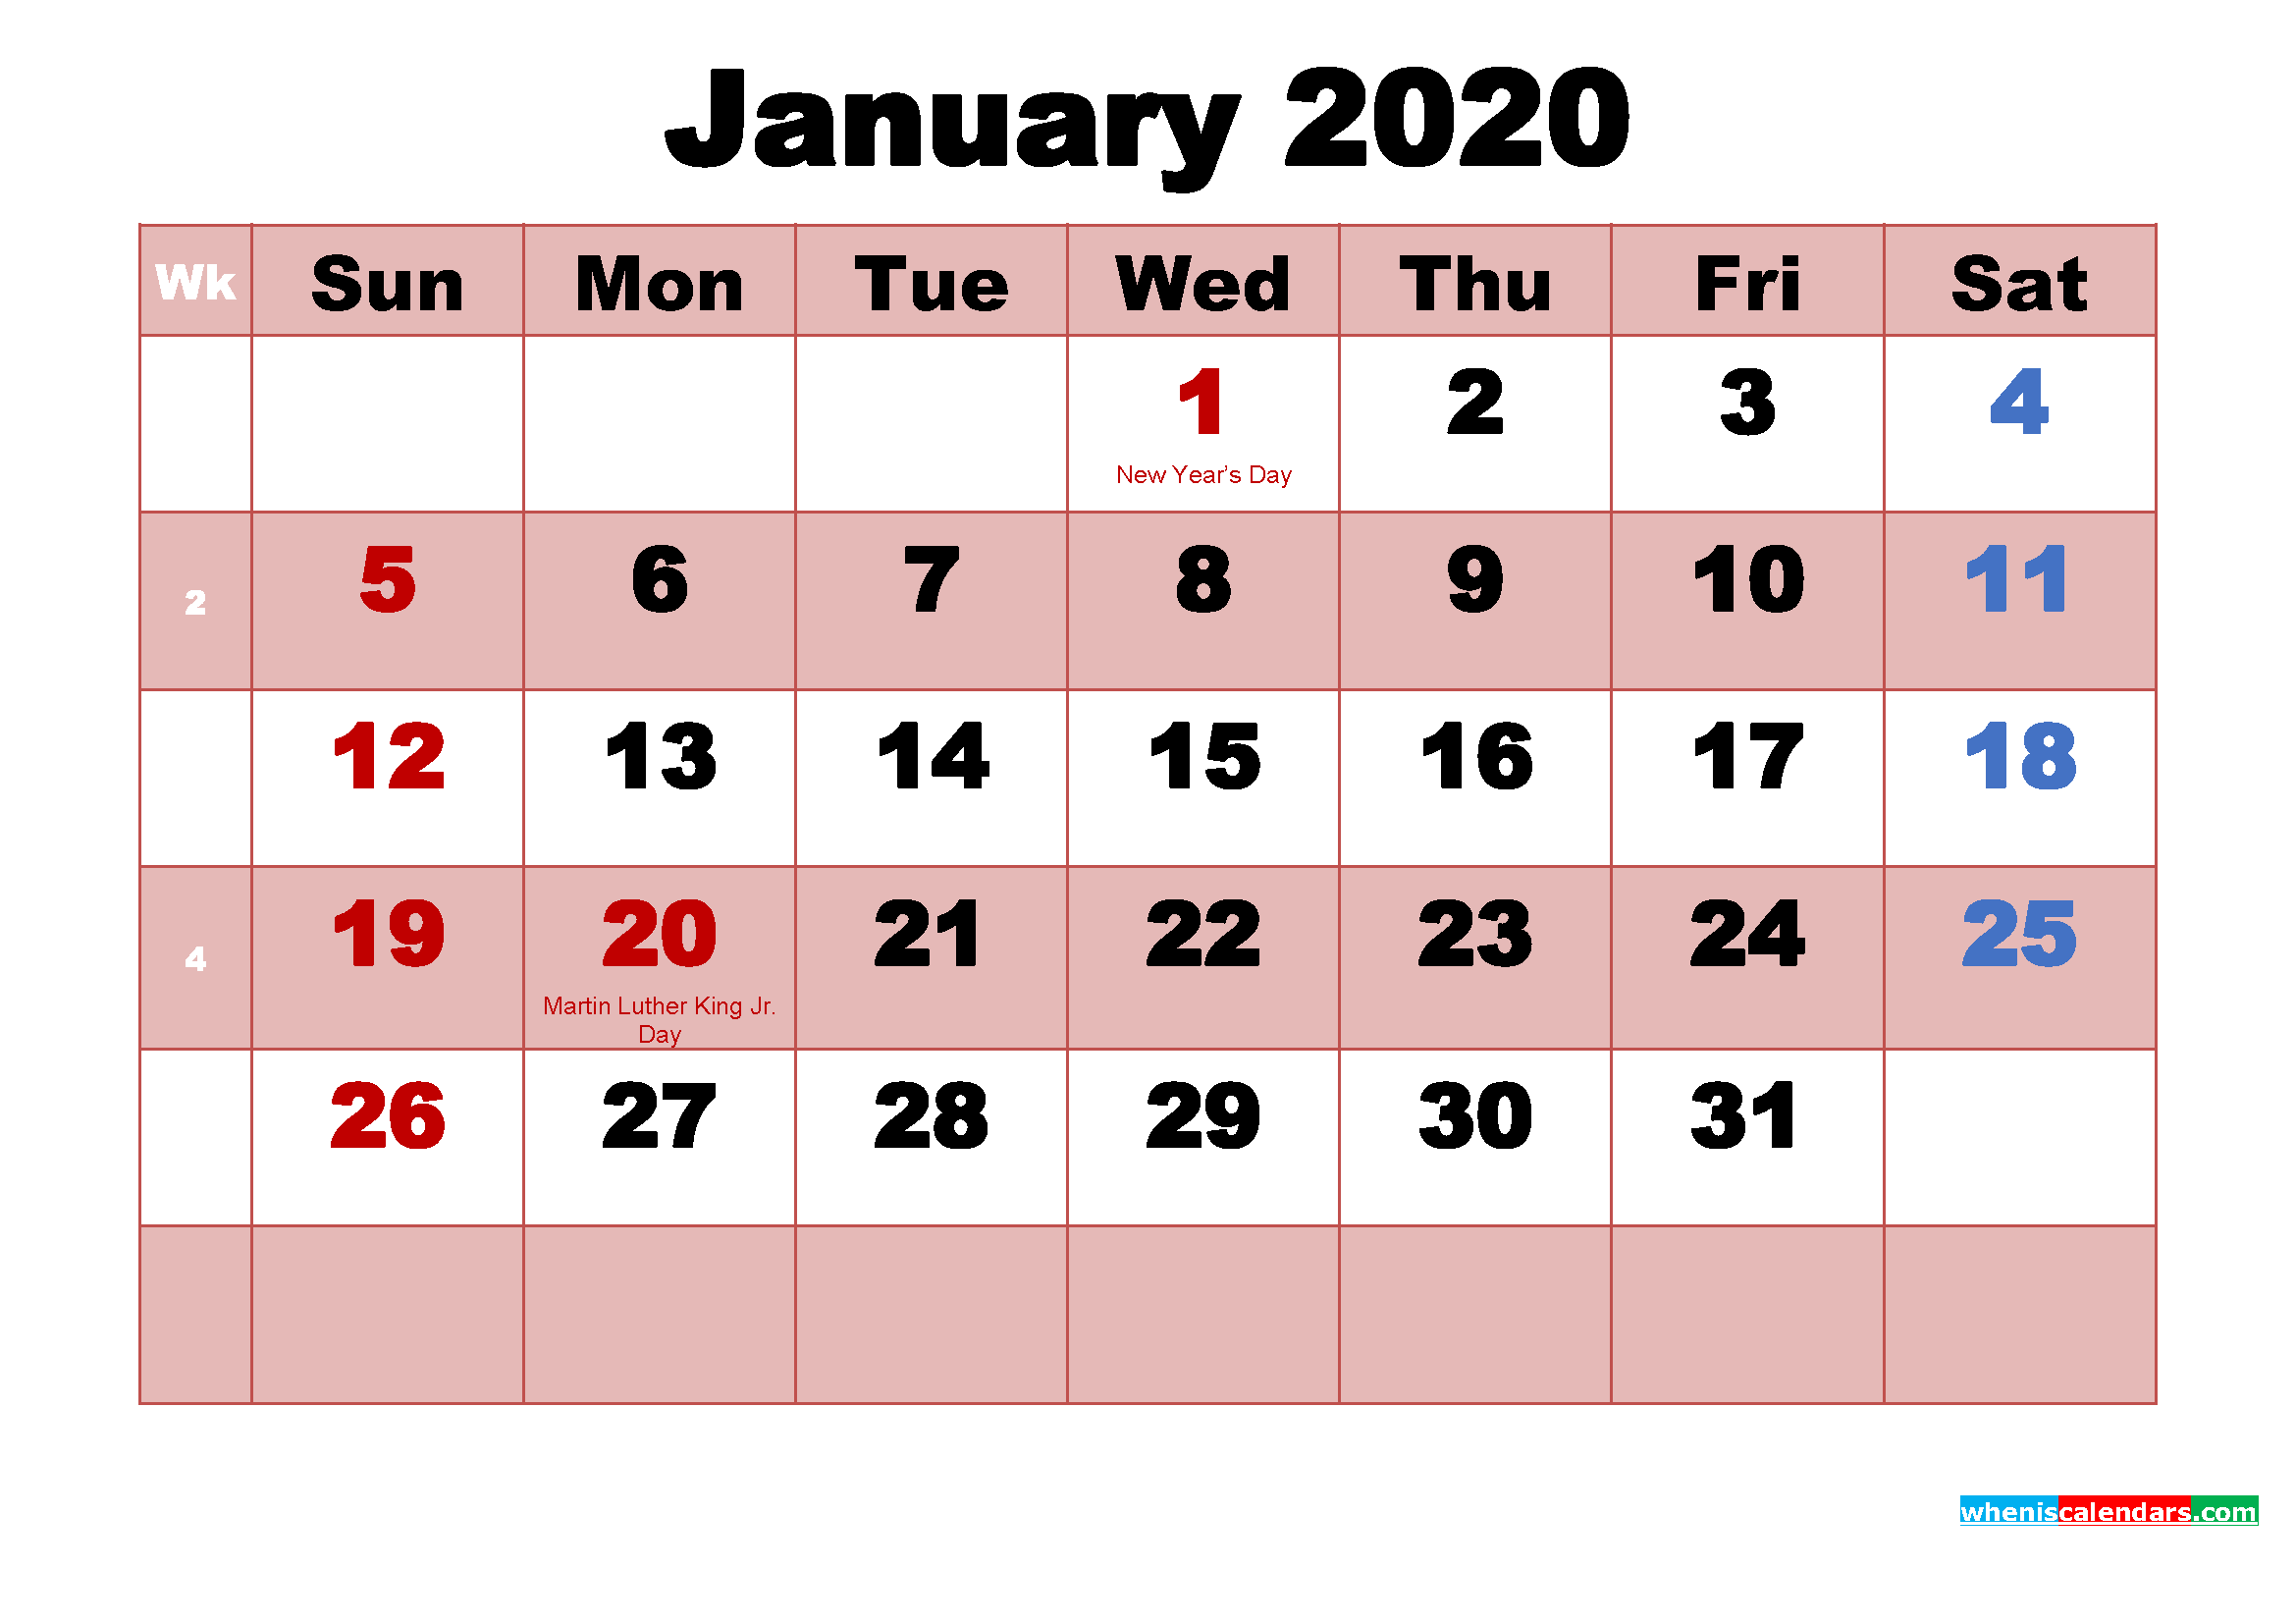 January 2020 Printable Monthly Calendar with Holidays